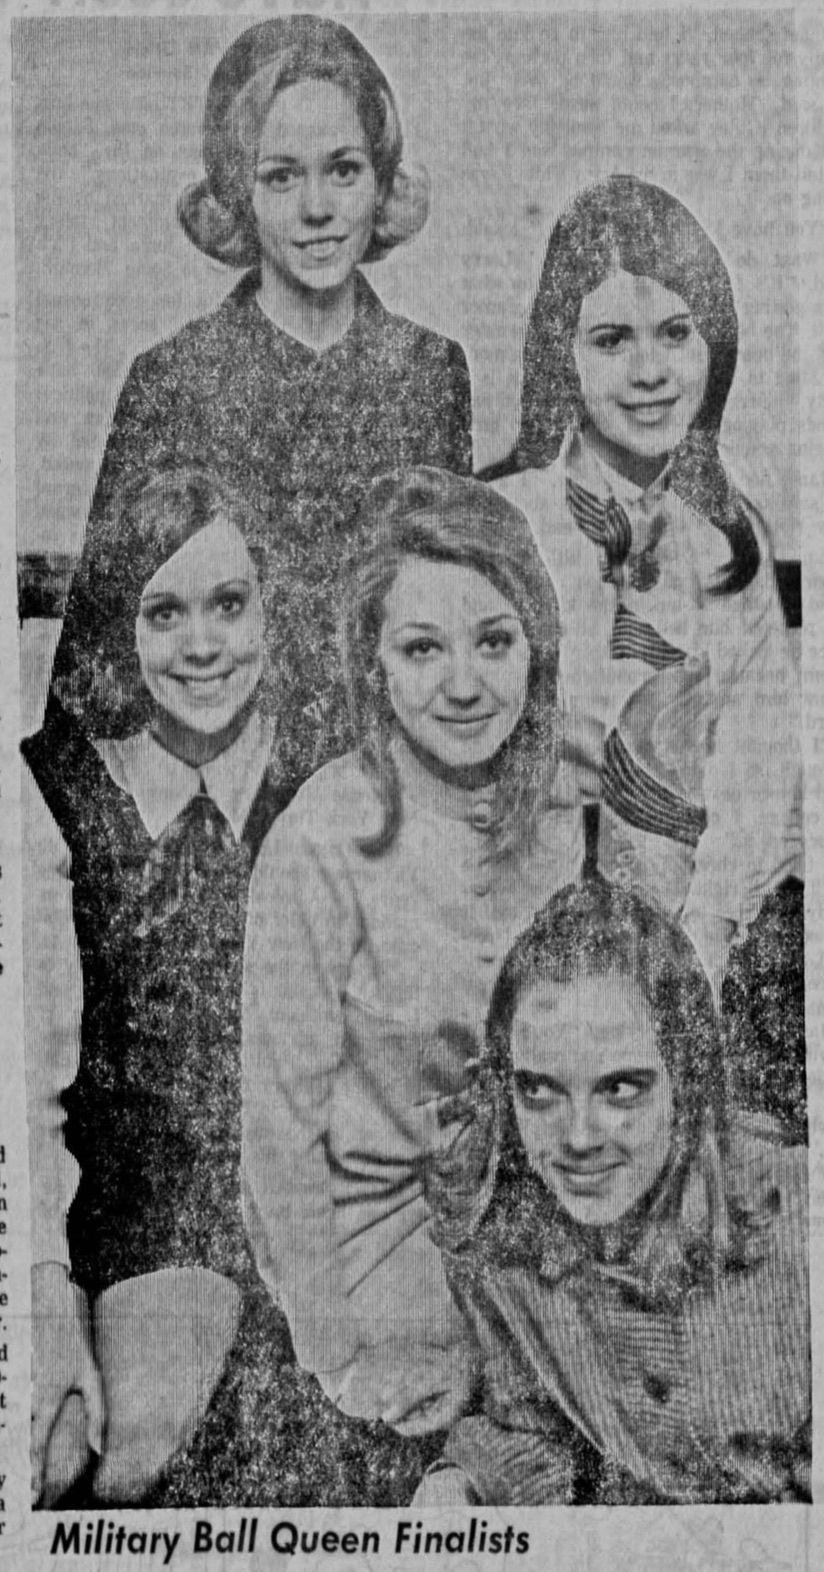 Photo from a 1969 newspaper captioned "Military Ball Queen Finalists." Four smiling young women and a woman looking deviously to the side.